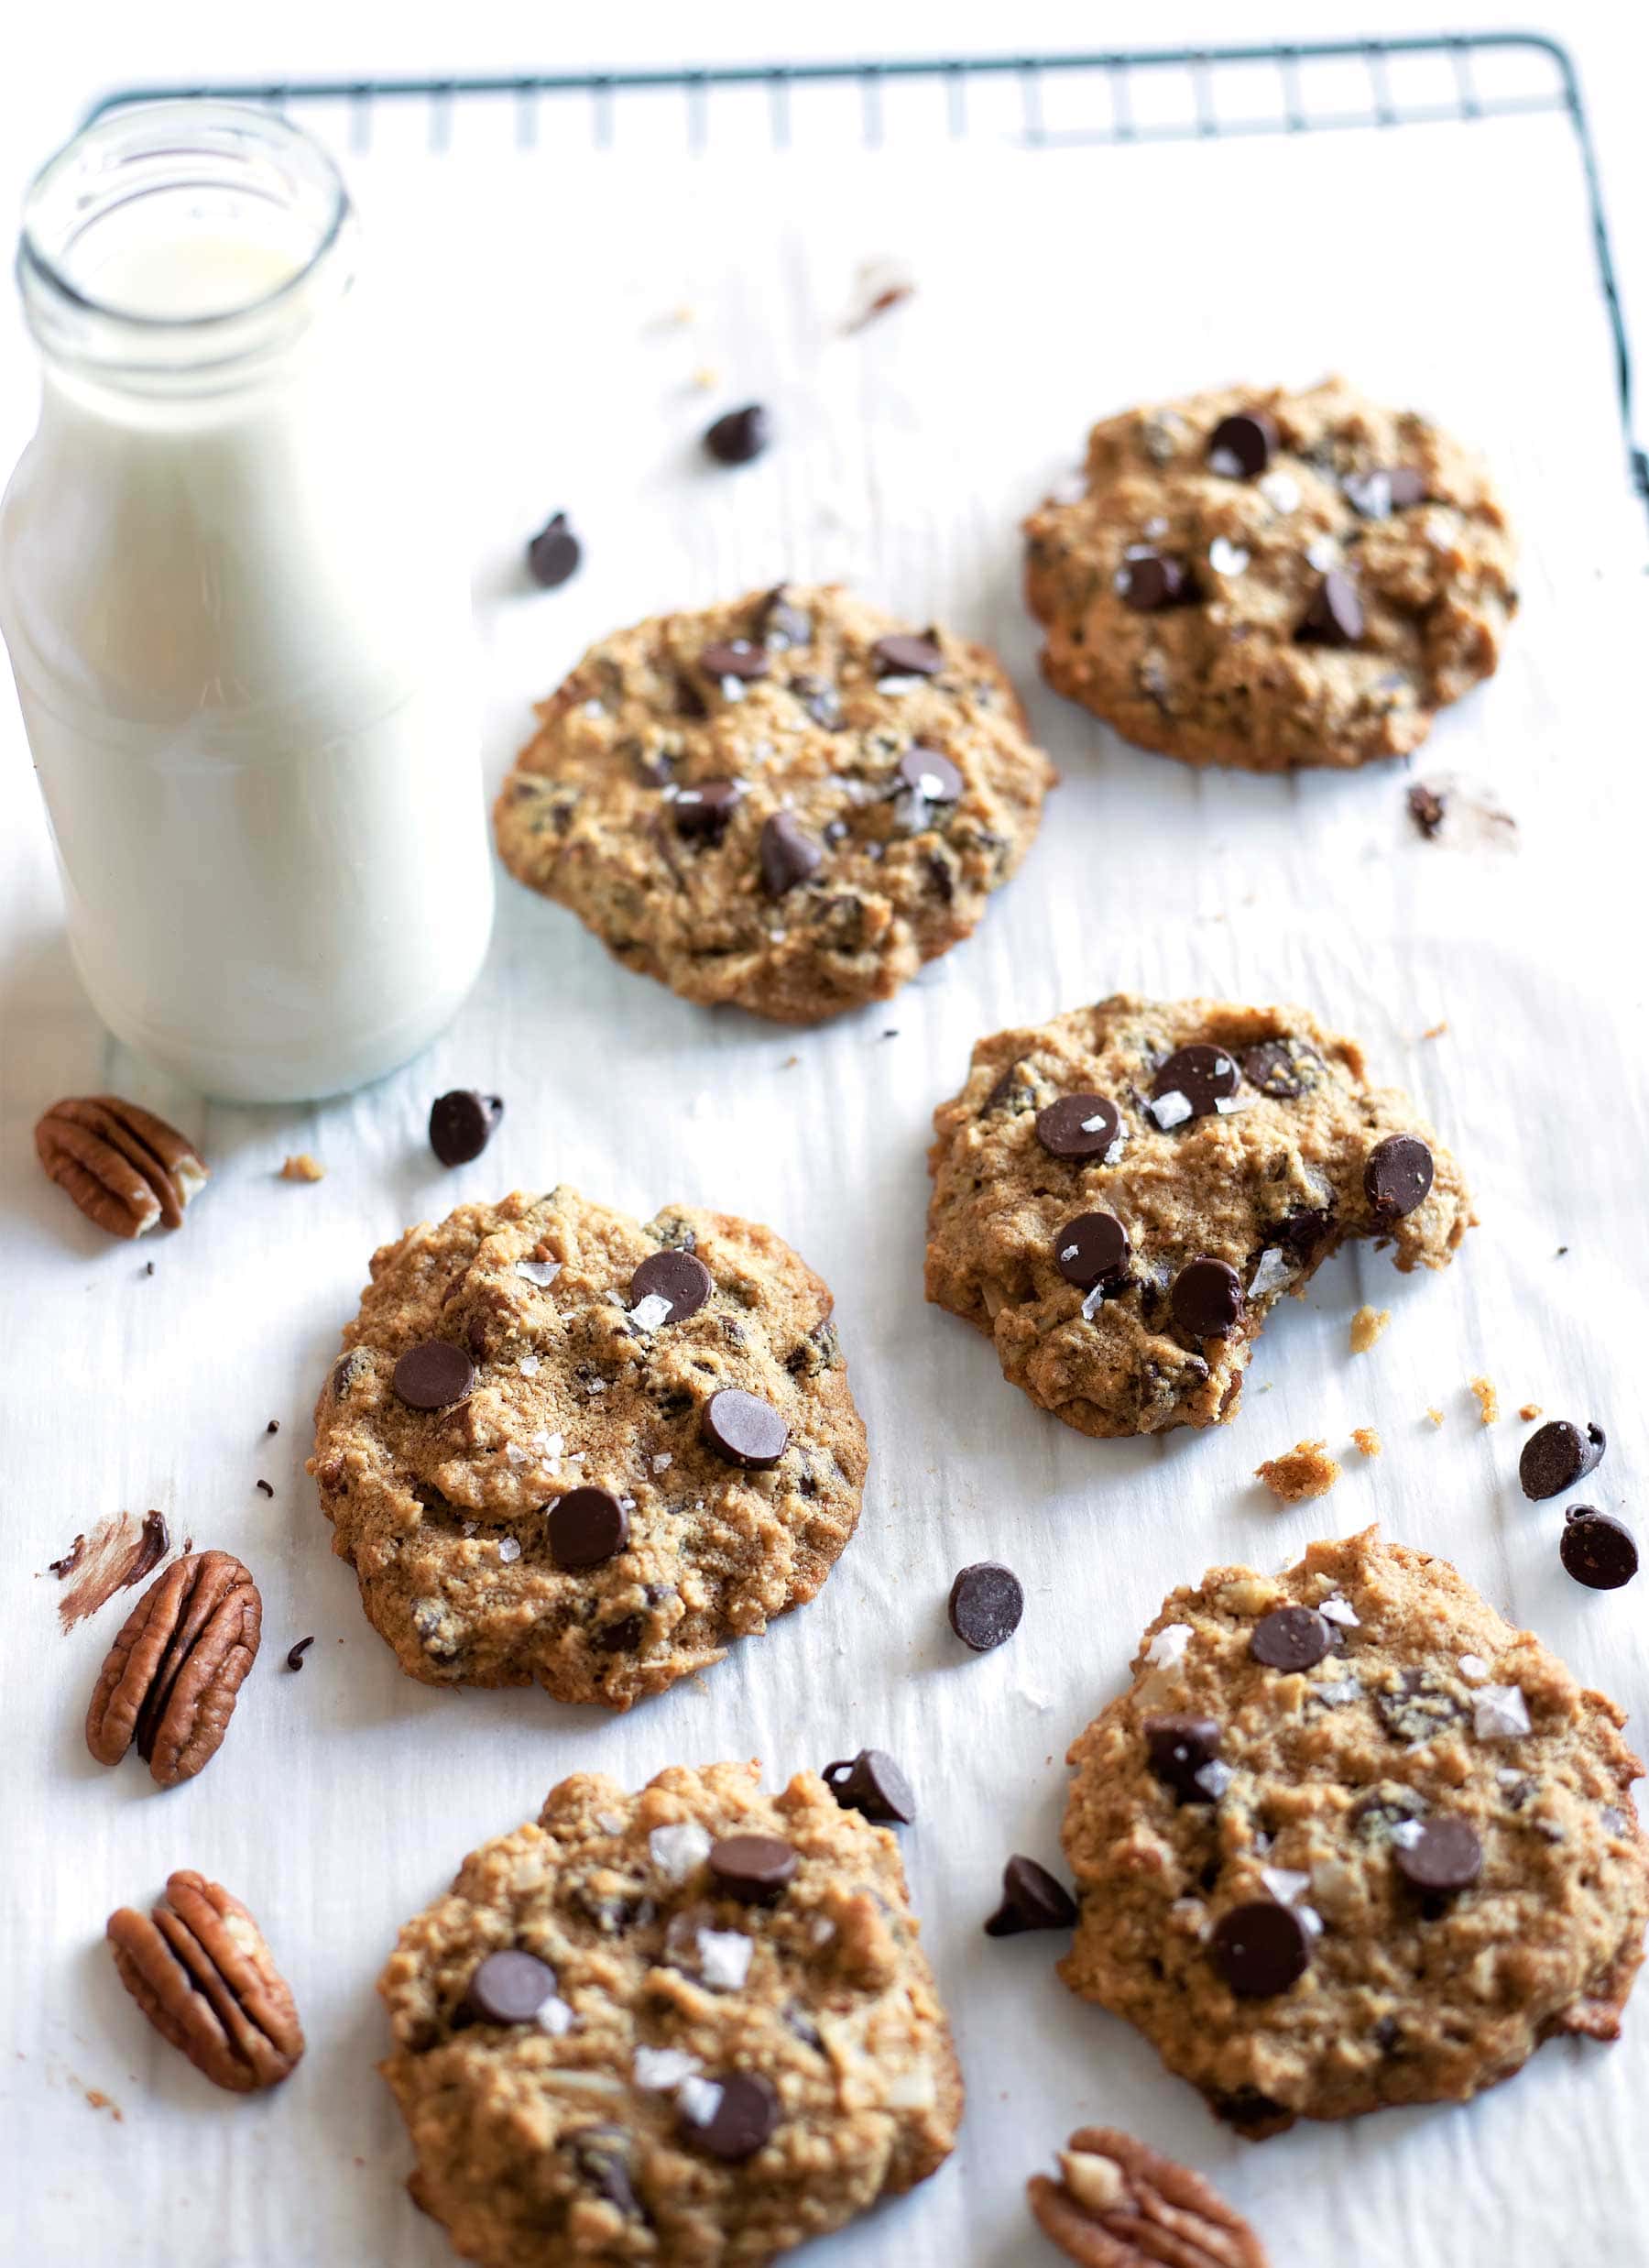 BEST COOKIES EVER in less than 30 minutes! These gluten free cowboy cookies are stuffed full of chocolate chips, pecans, coconut, and oats and are seriously addictive! They are so easy to make and can also be made low carb or paleo! These are truly the best gluten free cookies. #healthycookies #glutenfreecookies #glutenfreebaking #healthybaking #lowcarbcookies #lowcarbbaking #cowboycookies #lowcarbrecipe #healthyeating #lowcarb #paleocookies #paleobaking #refinedsugarfree